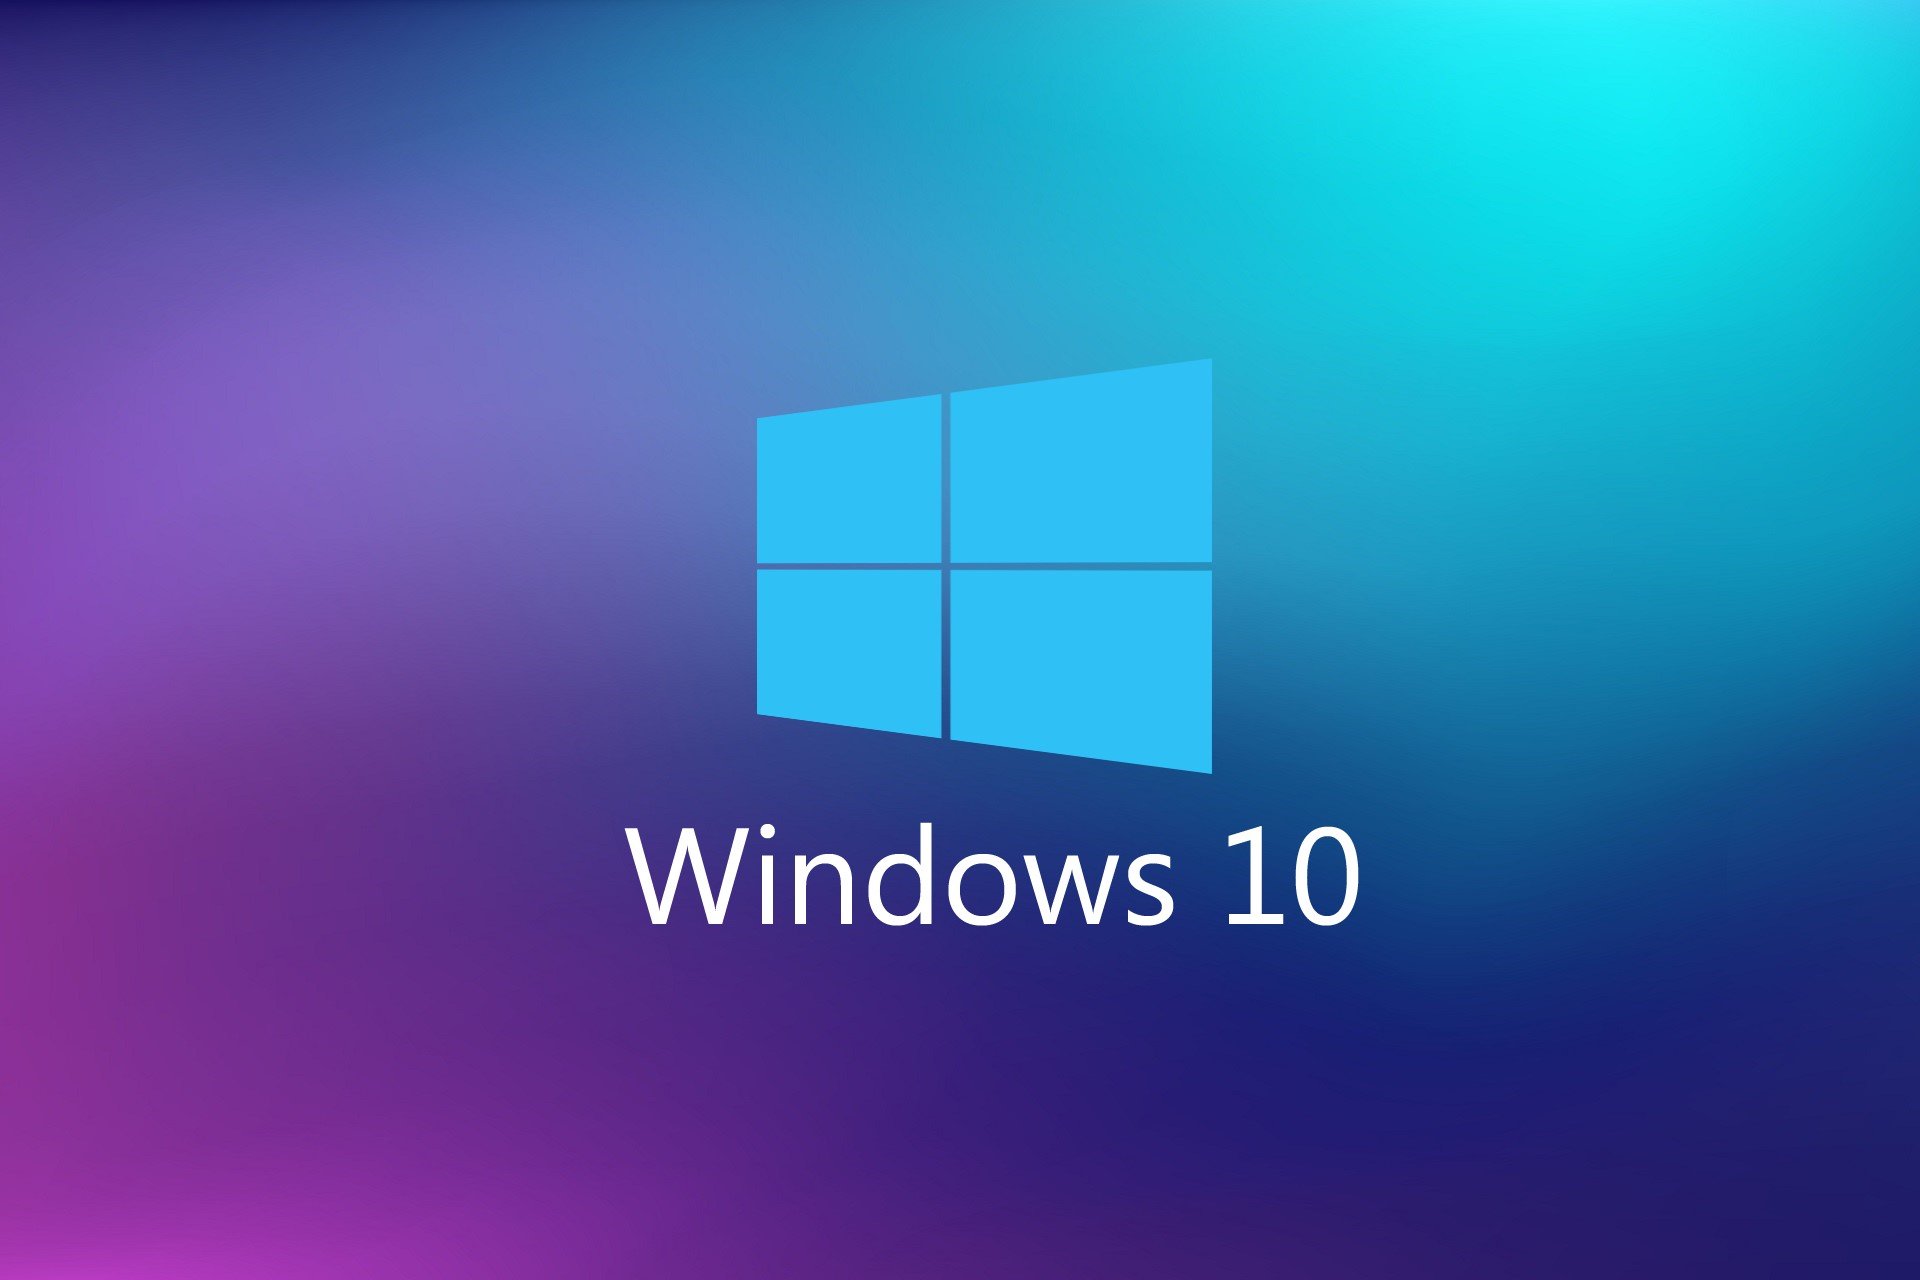 How to Properly Dual-Boot Windows 10 With Another OS